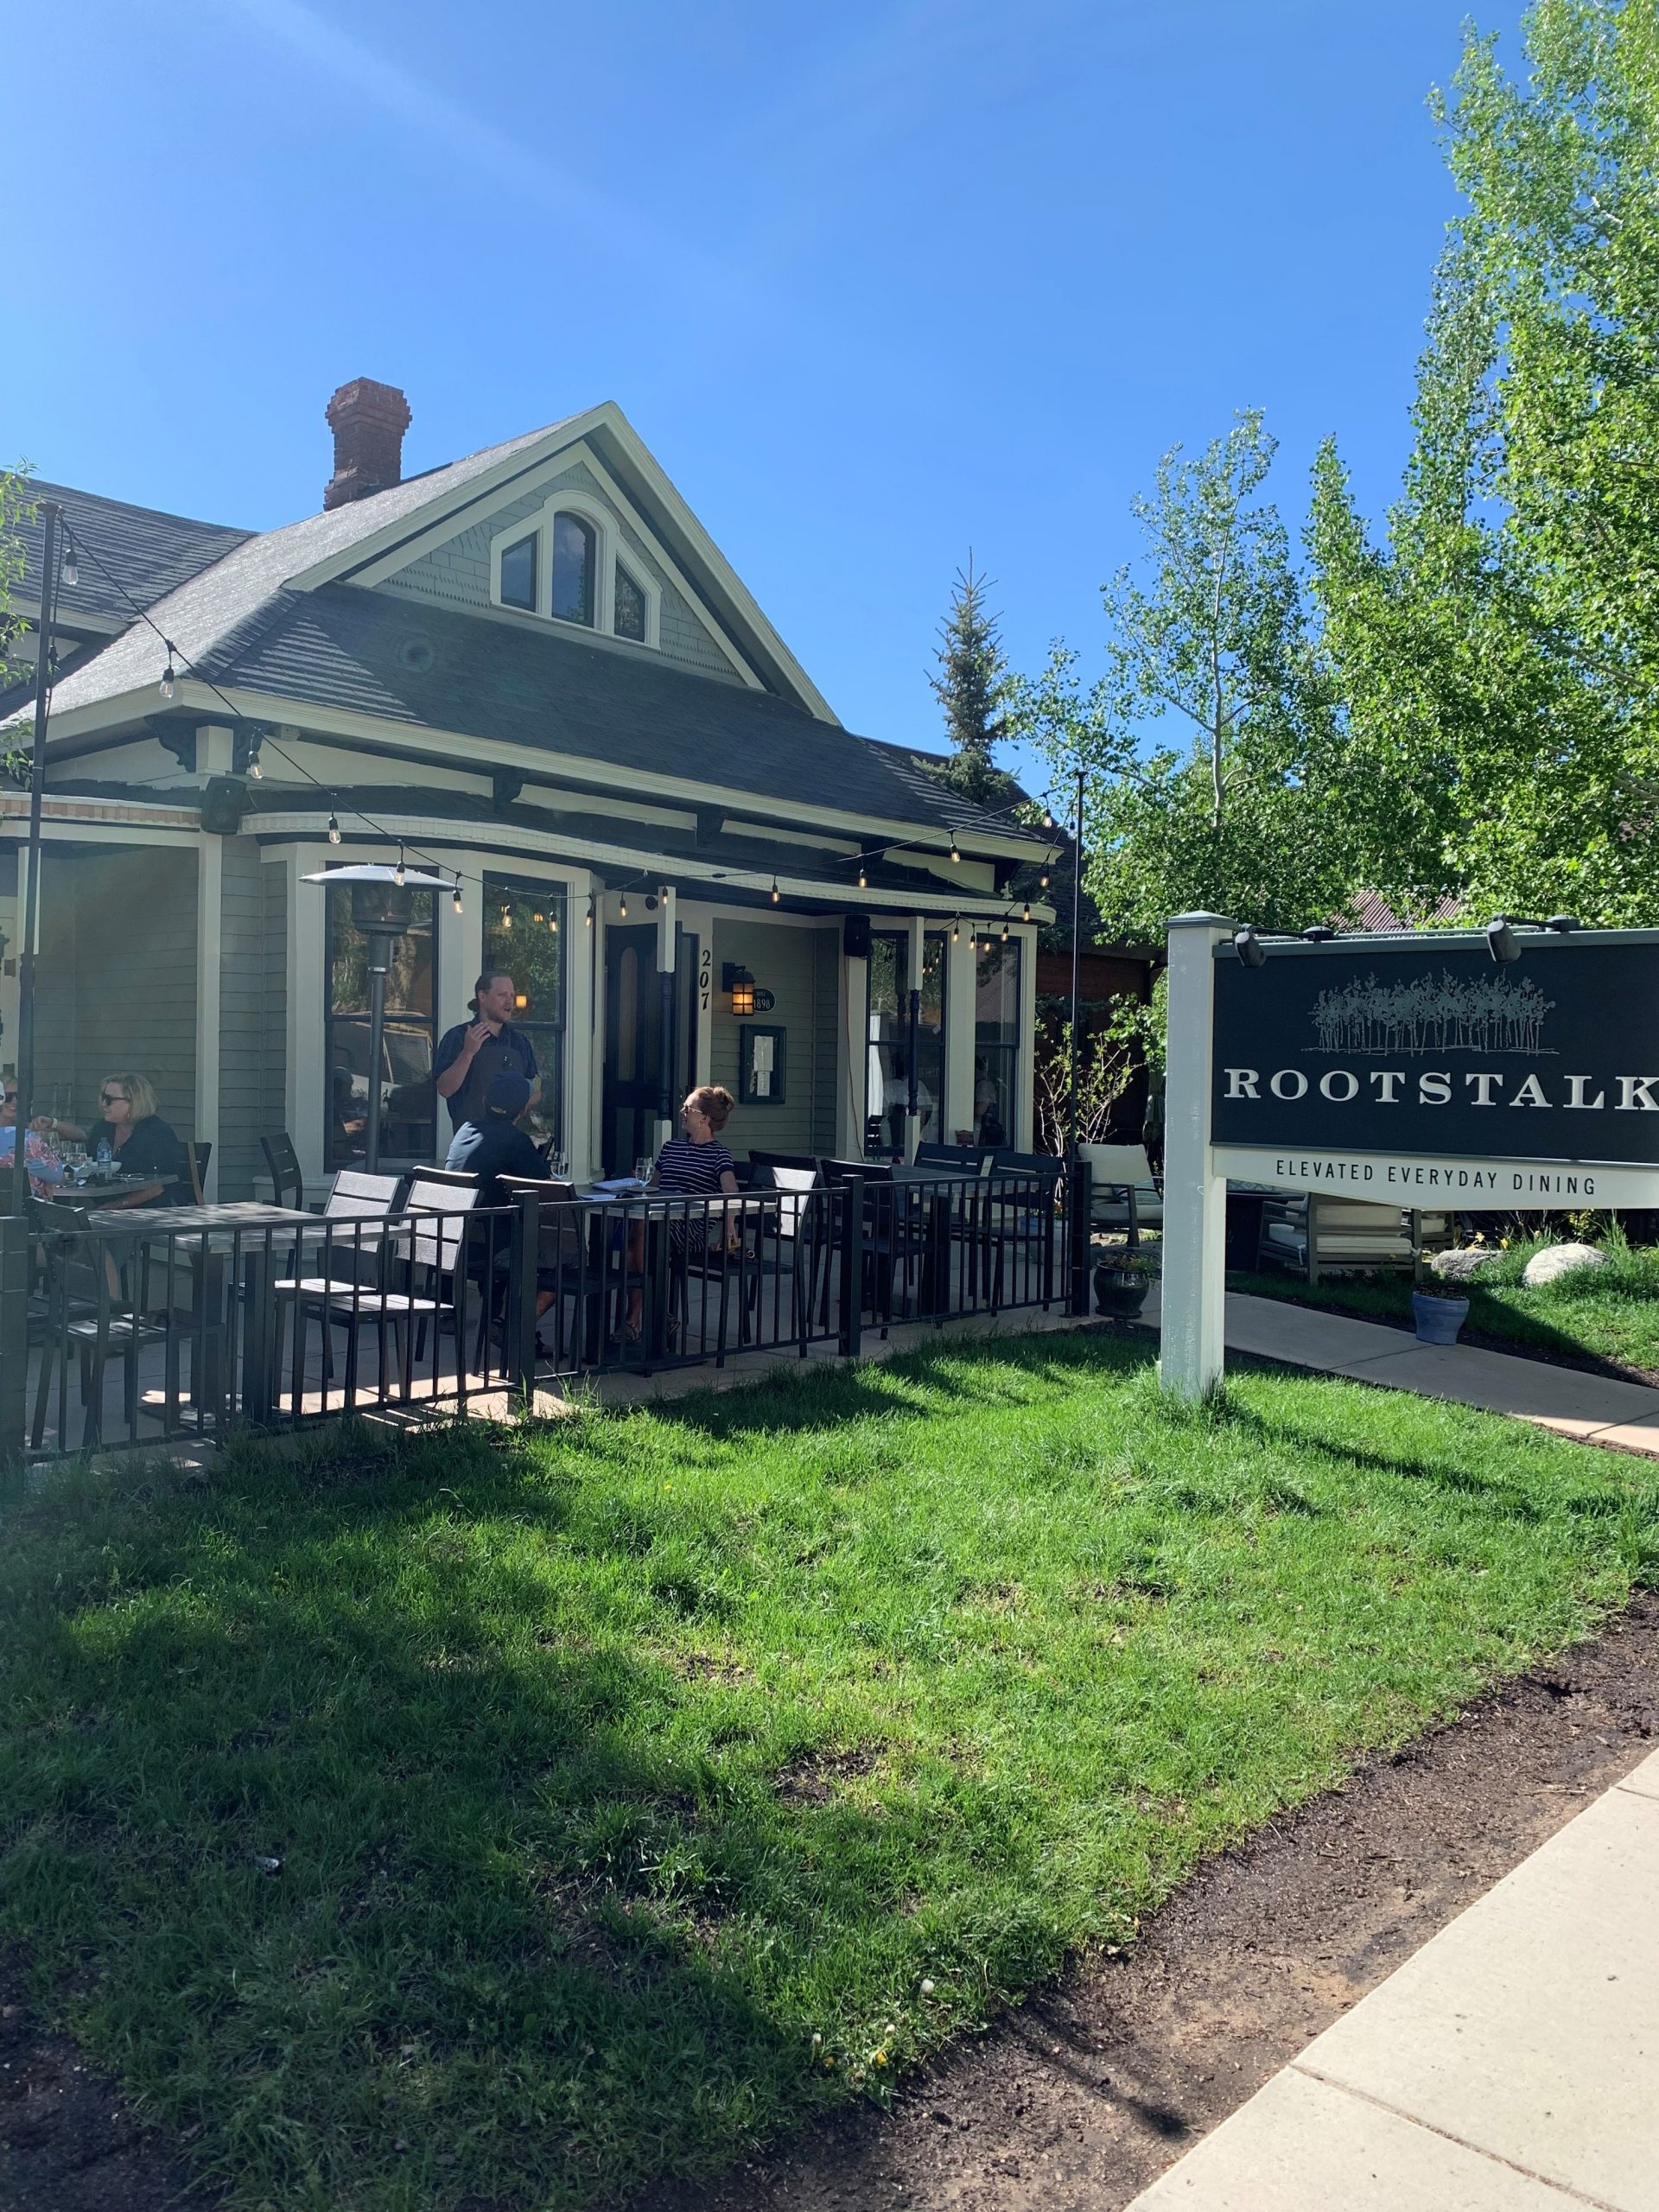 Roostalk Restaurant is located in a charming historic house on Main Street Breckenridge.